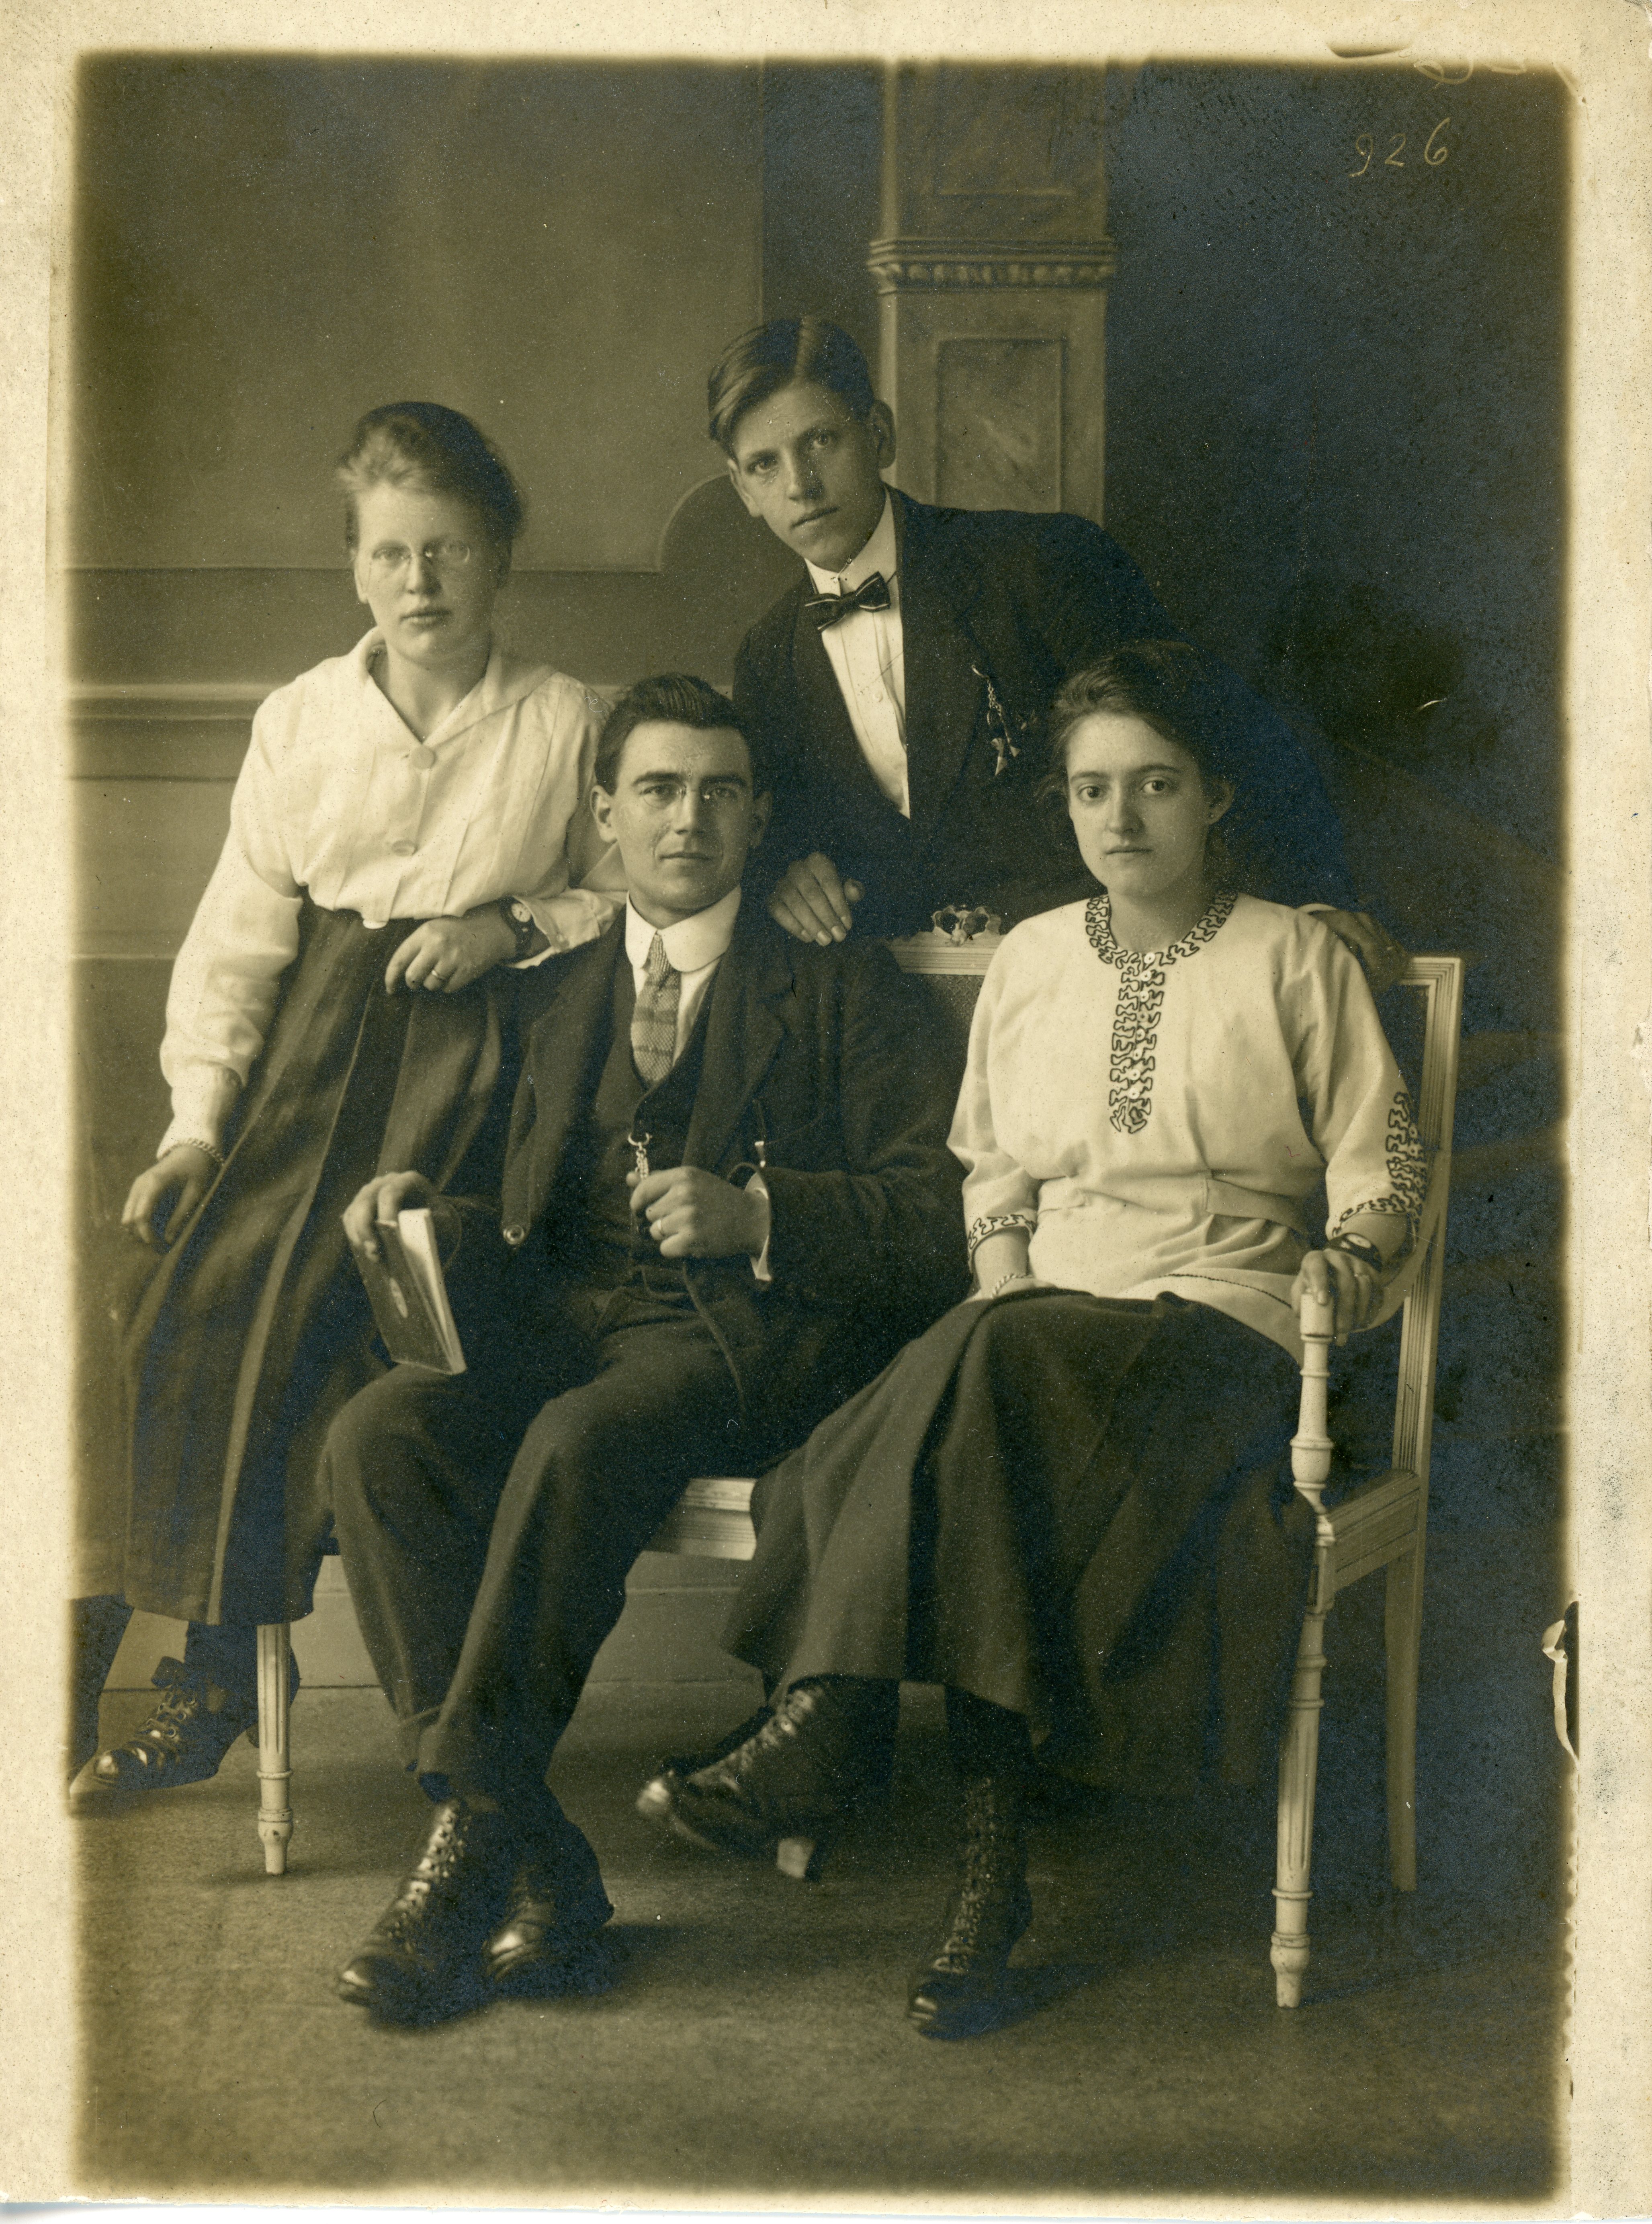 Geertje Visser with other missionaries, Circa 1919